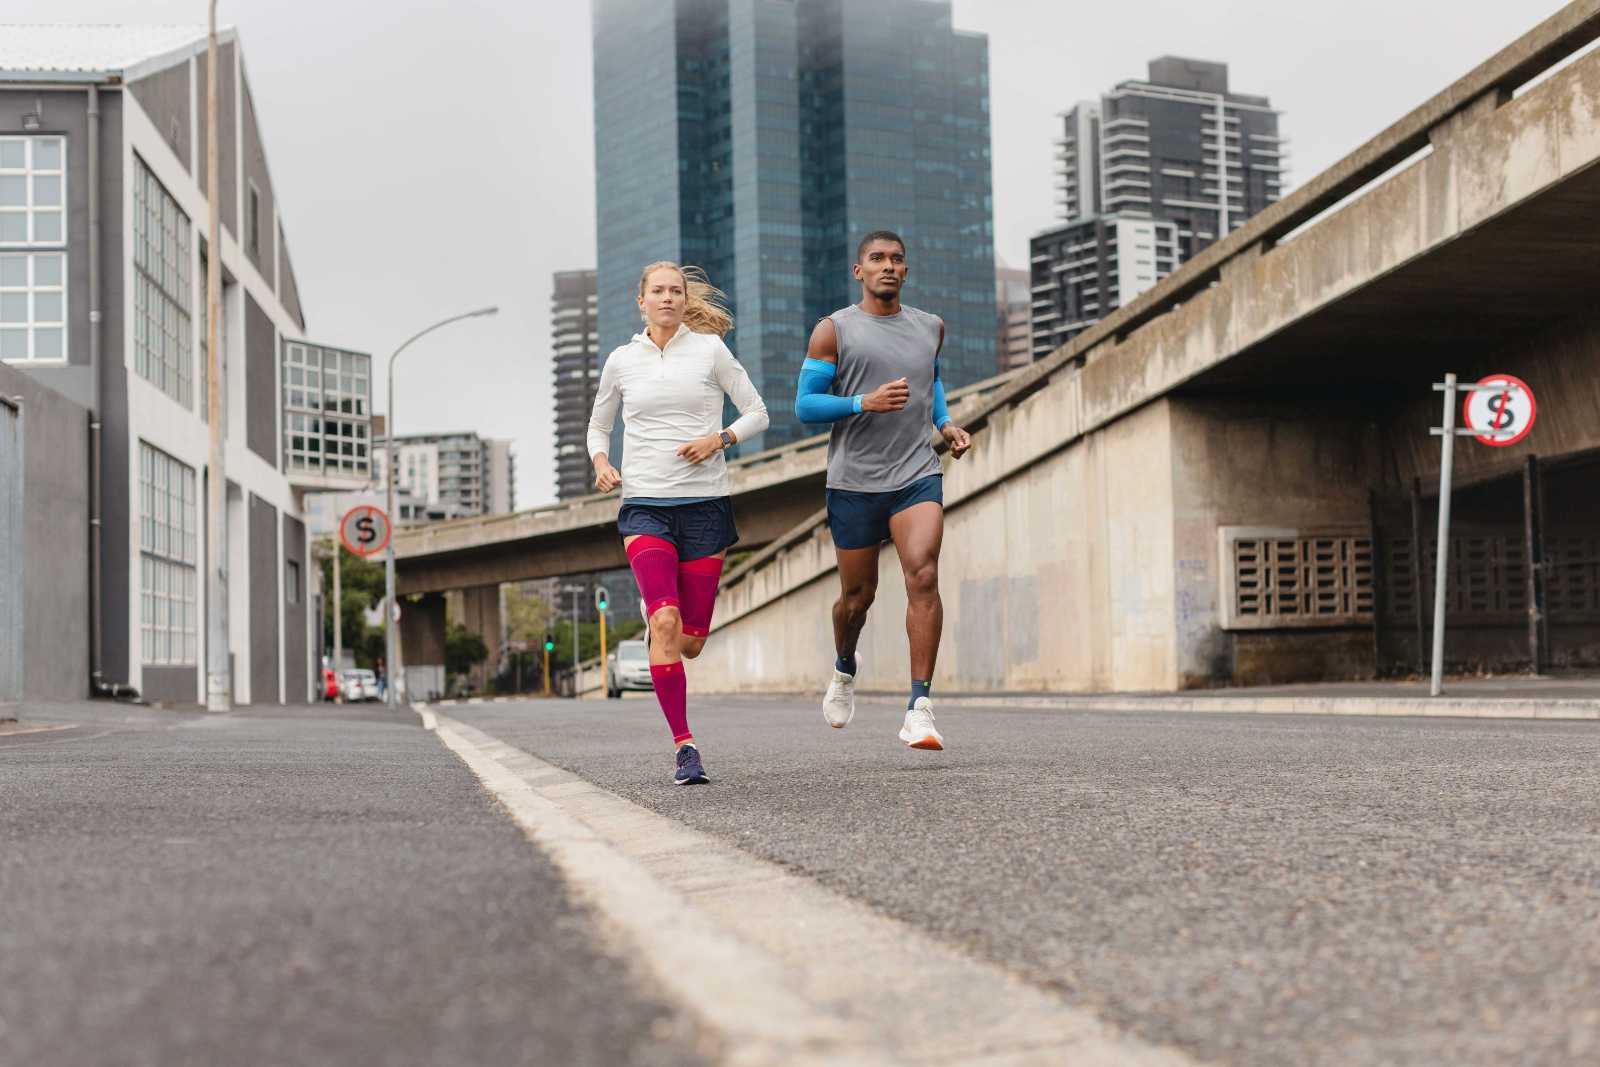 A woman with pink compression sleeves and a man with blue arm sleeves and short running socks run through a big city